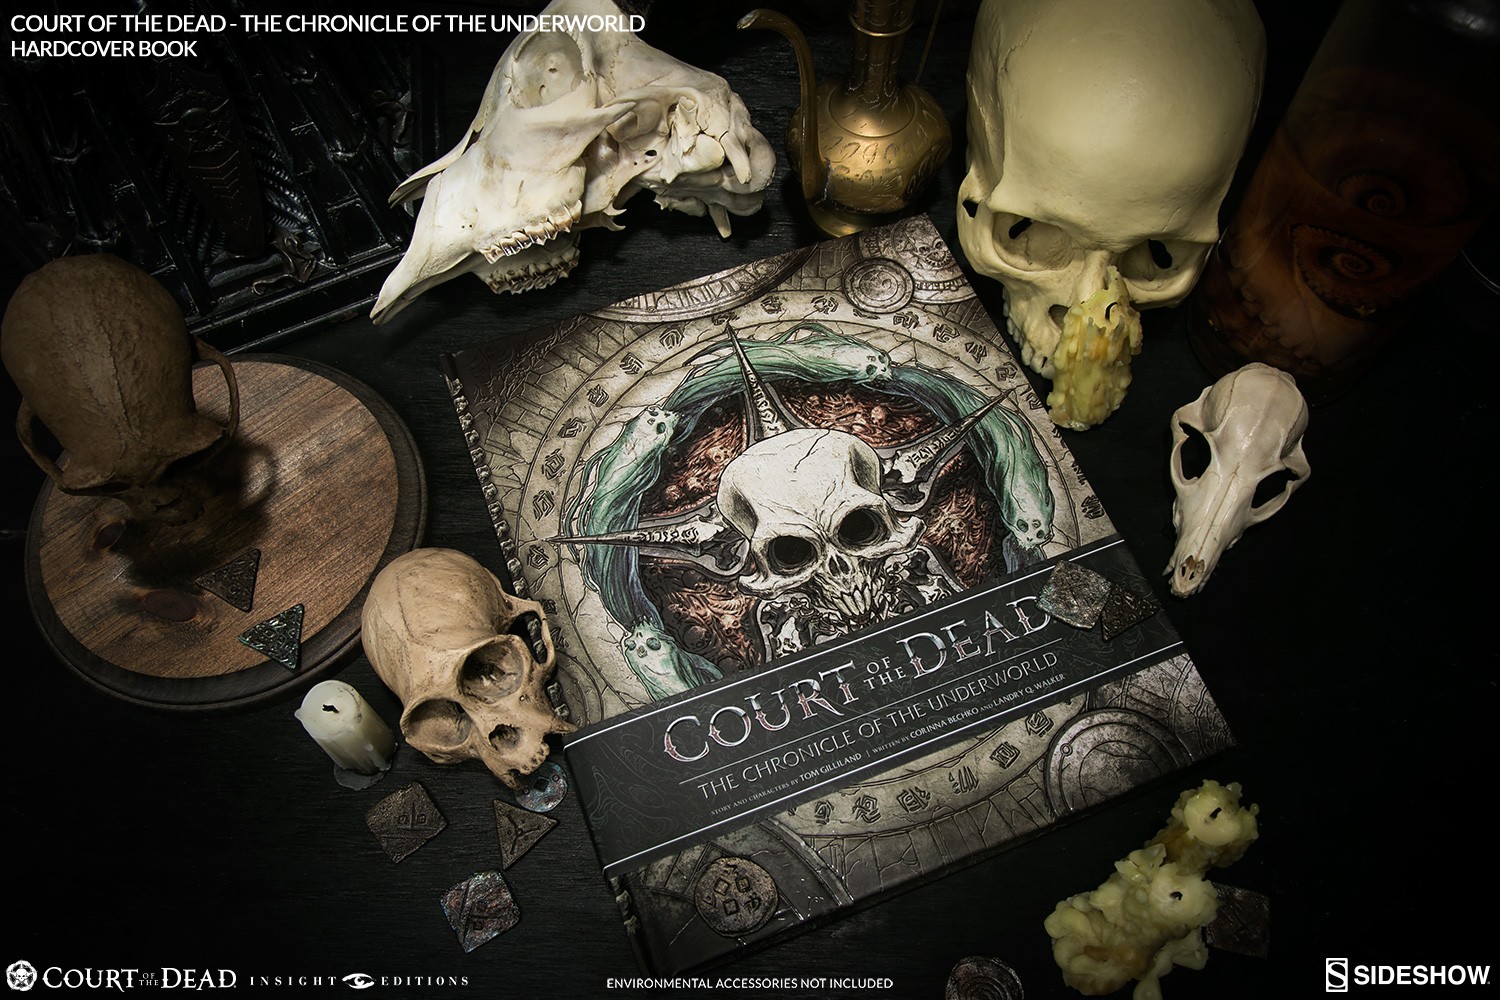 Court of the Dead The Chronicle of the Underworld View 11